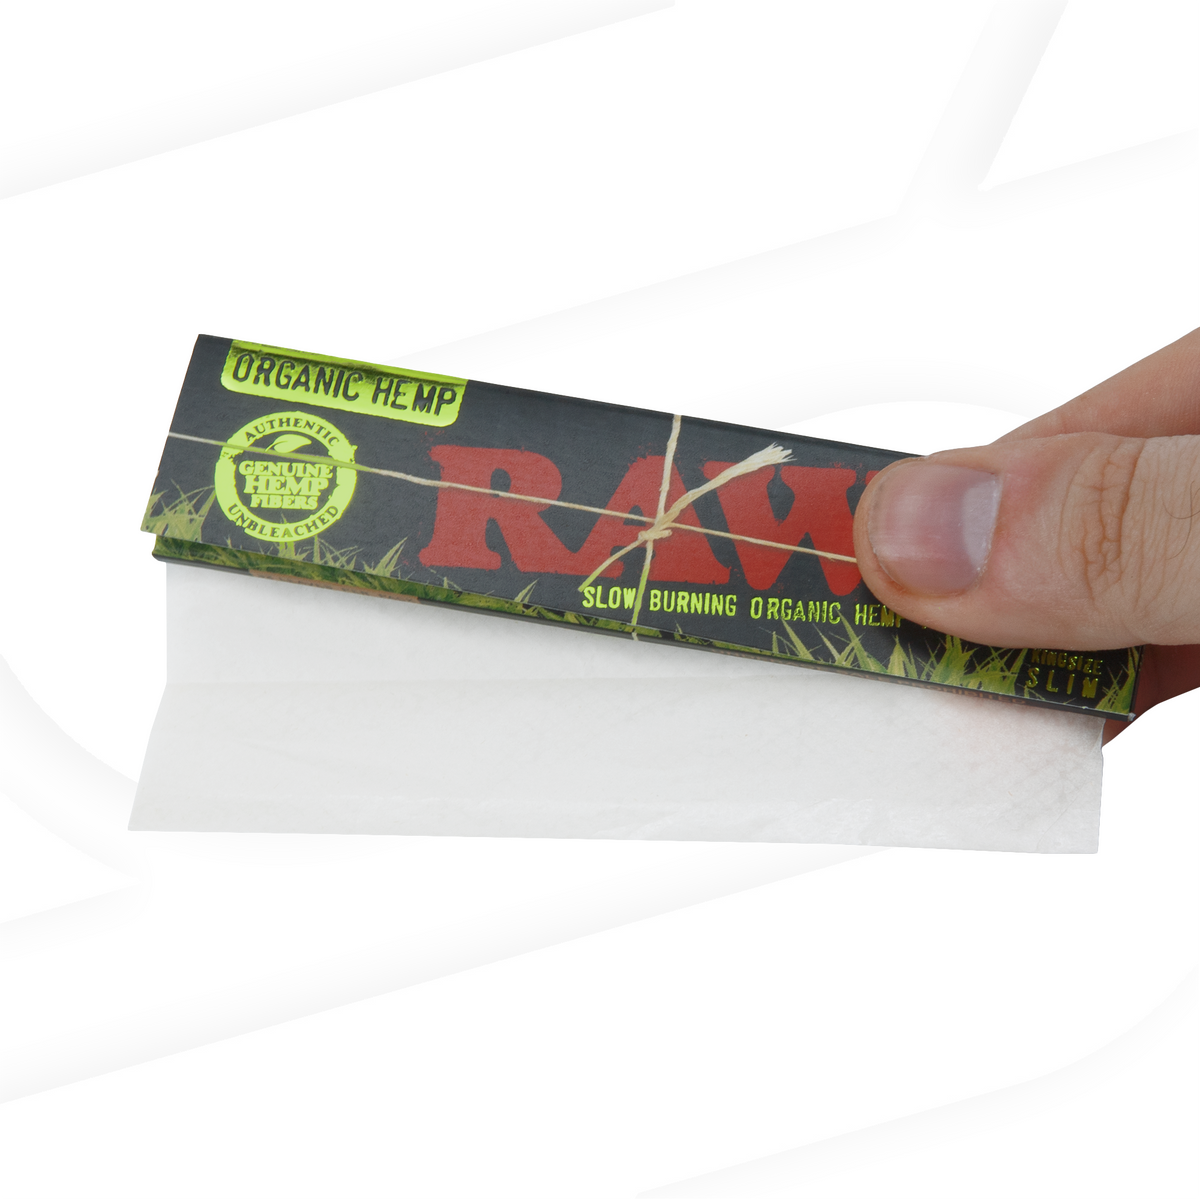 RAW Black King Size Slim Organic Hemp Rolling Papers Rolling Papers esd-official